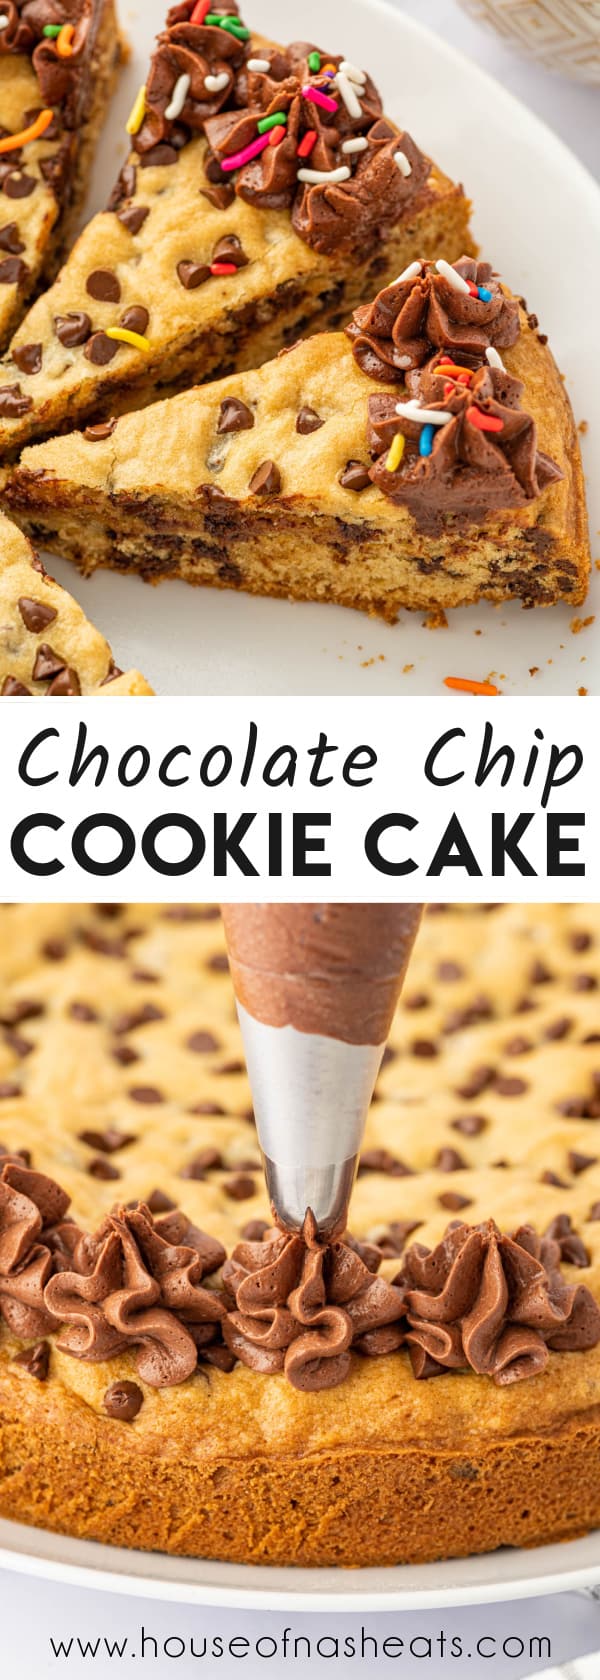 A collage of images of giant chocolate chip cookie cake with text overlay.